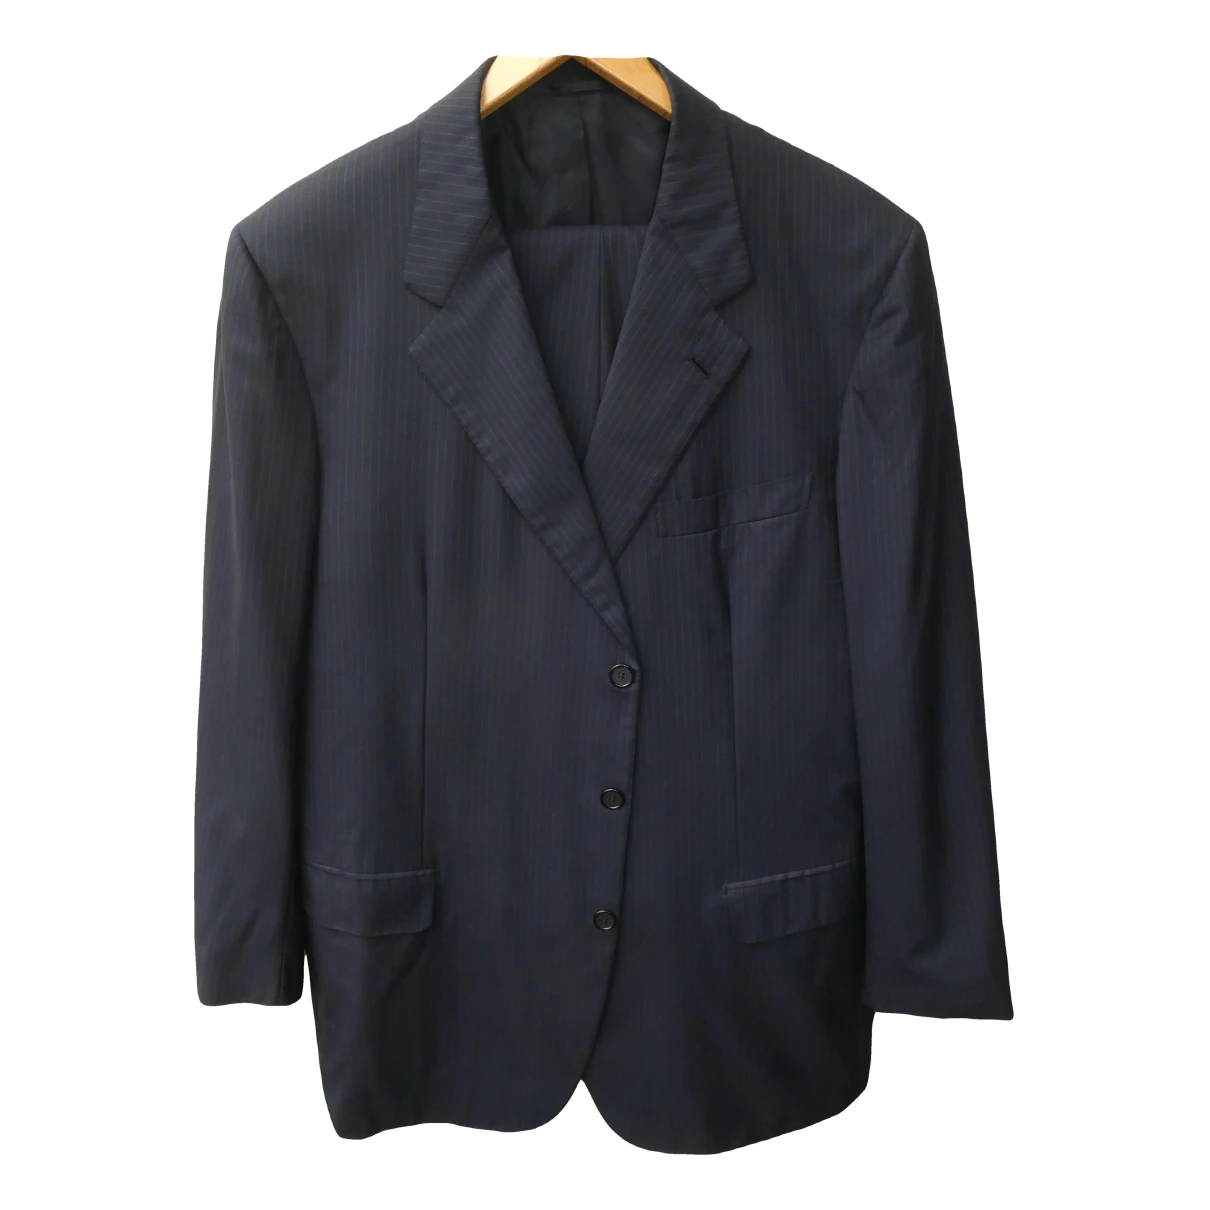 clothing Brioni suits for Male Wool 58 IT. Used condition